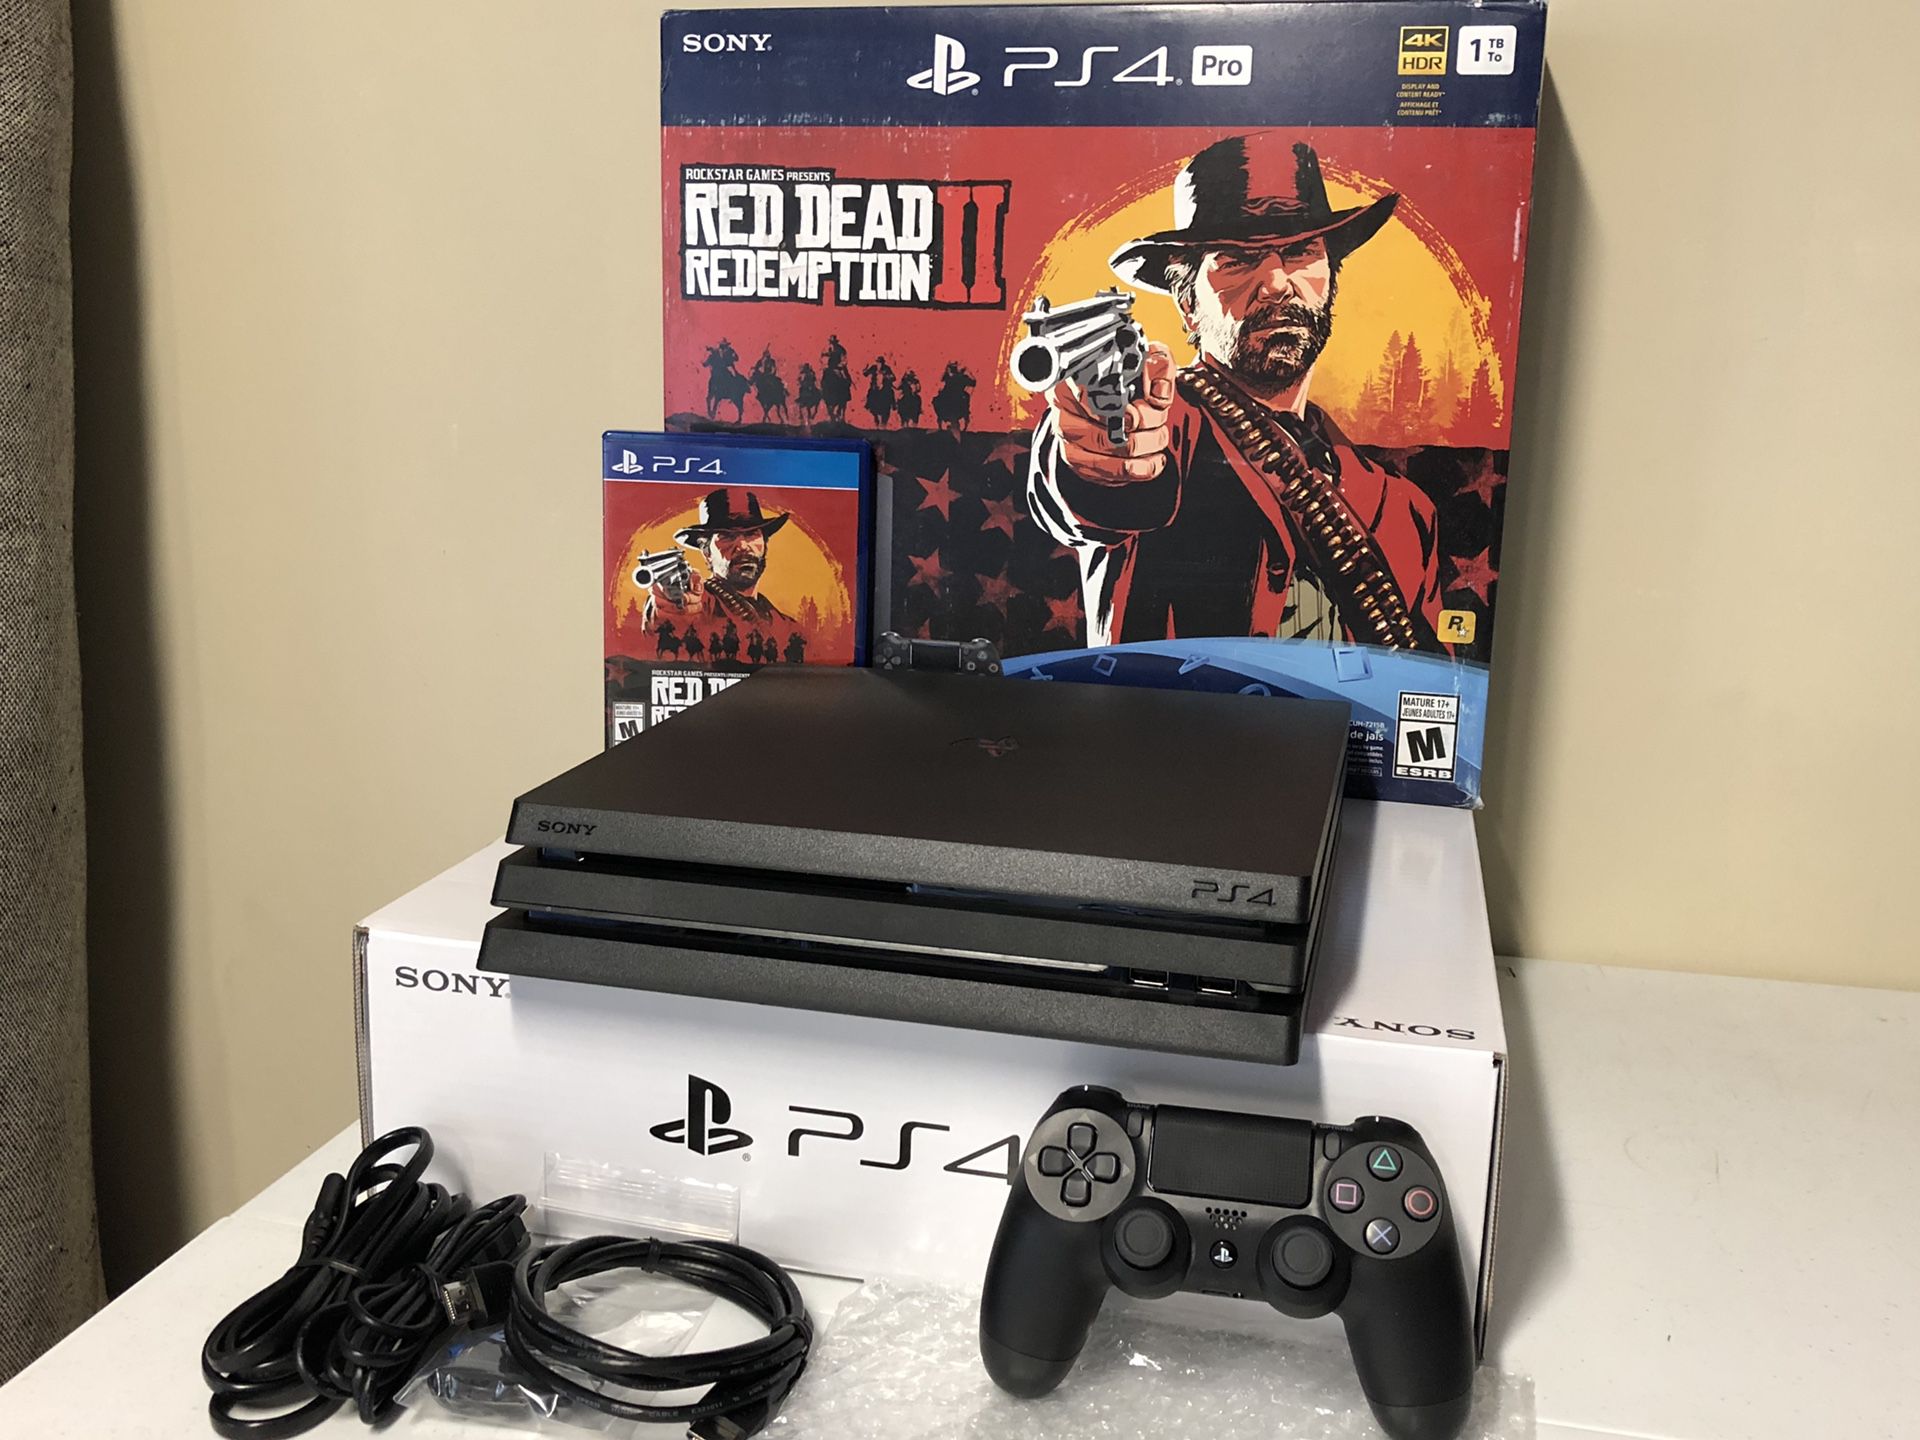 Sony PRO PlayStation Red Dead Redemption 2 Console Bundle 1TB w/ Control, Cables & Original for Sale in Summerville, SC - OfferUp